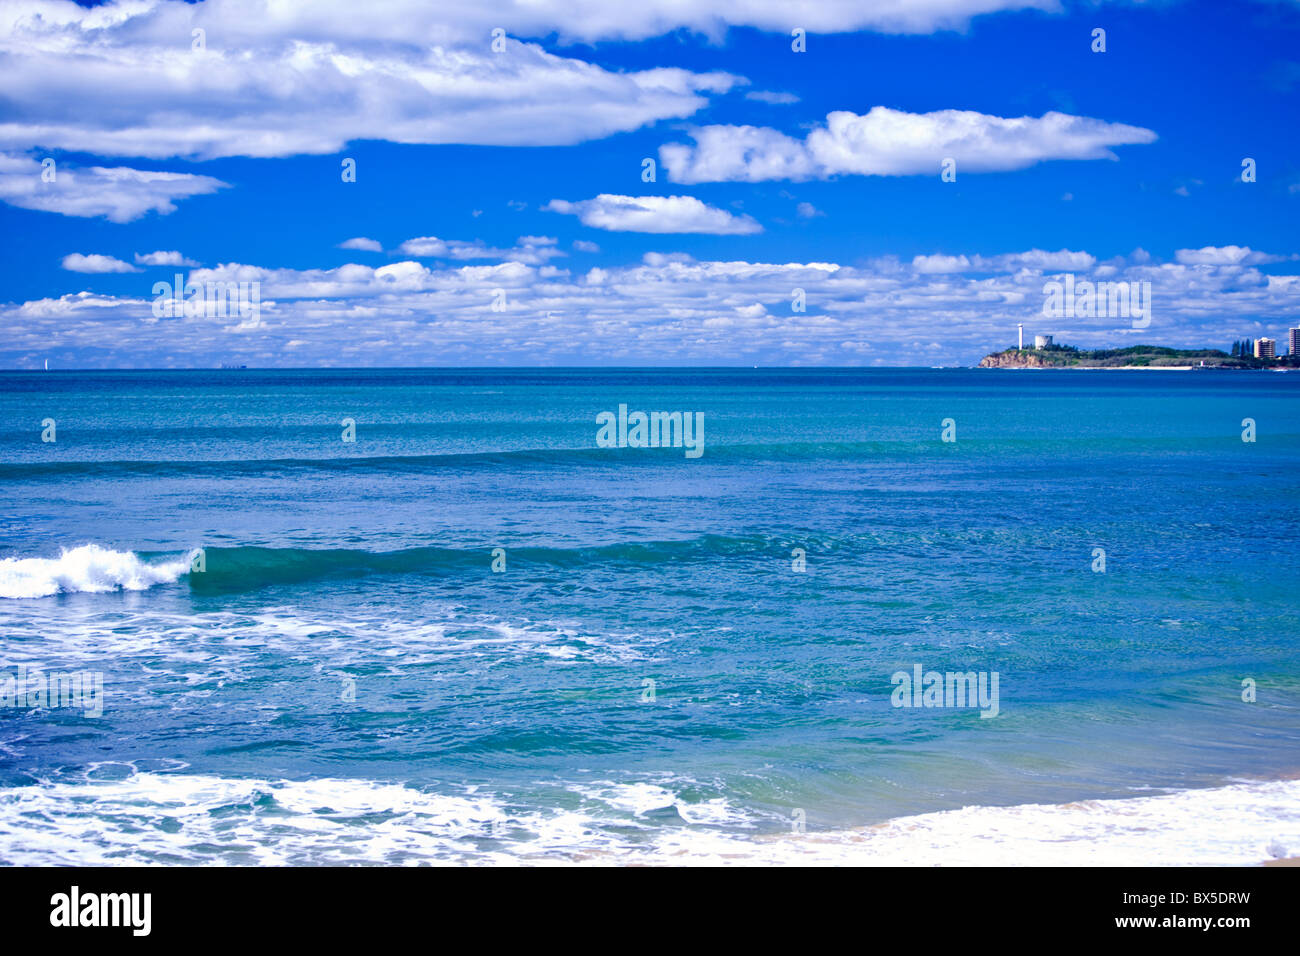 Beautiful blue ocean with small waves Point Cartwright in background Stock Photo